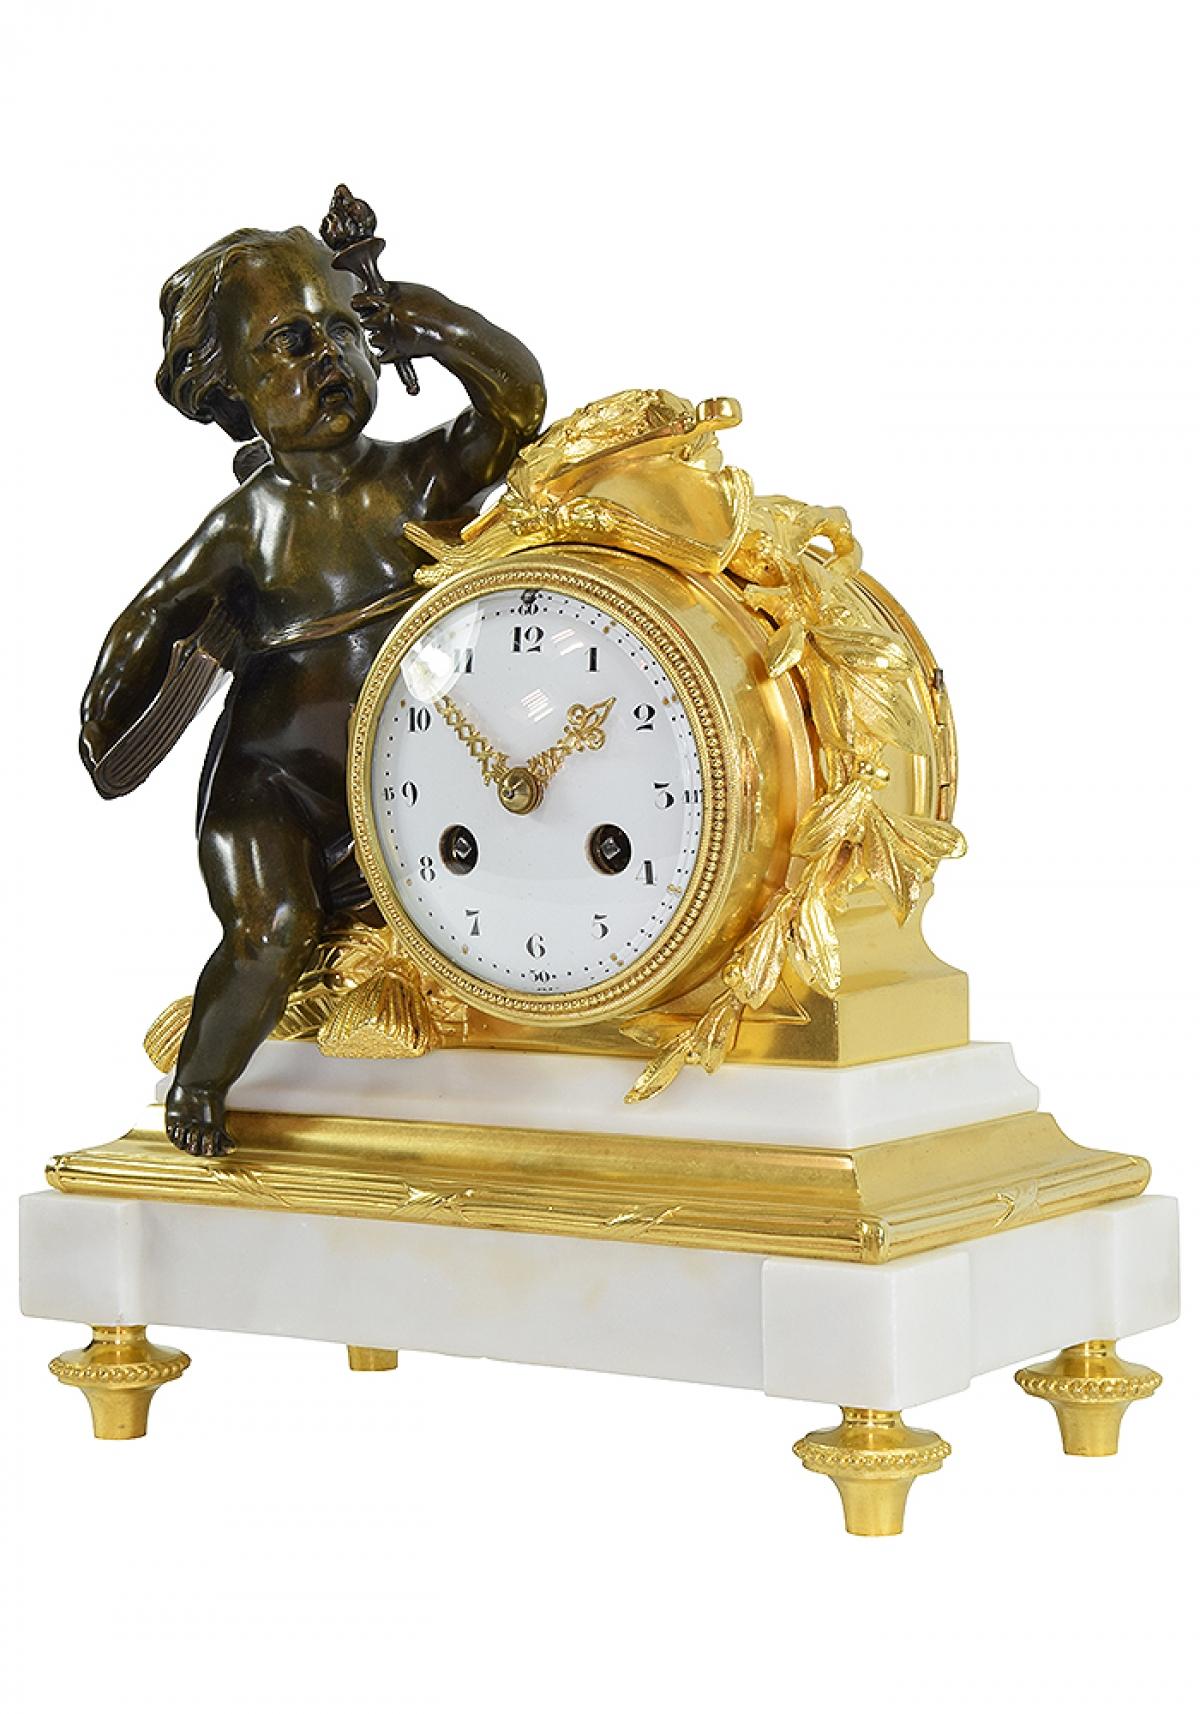 Magnificent small Napoleon III period clock in the Louis XVI style
Materials : Gilt bronze and marble
Measures: Height : 26cm / Width : 21cm / Depth : 12cm
Works perfectly.